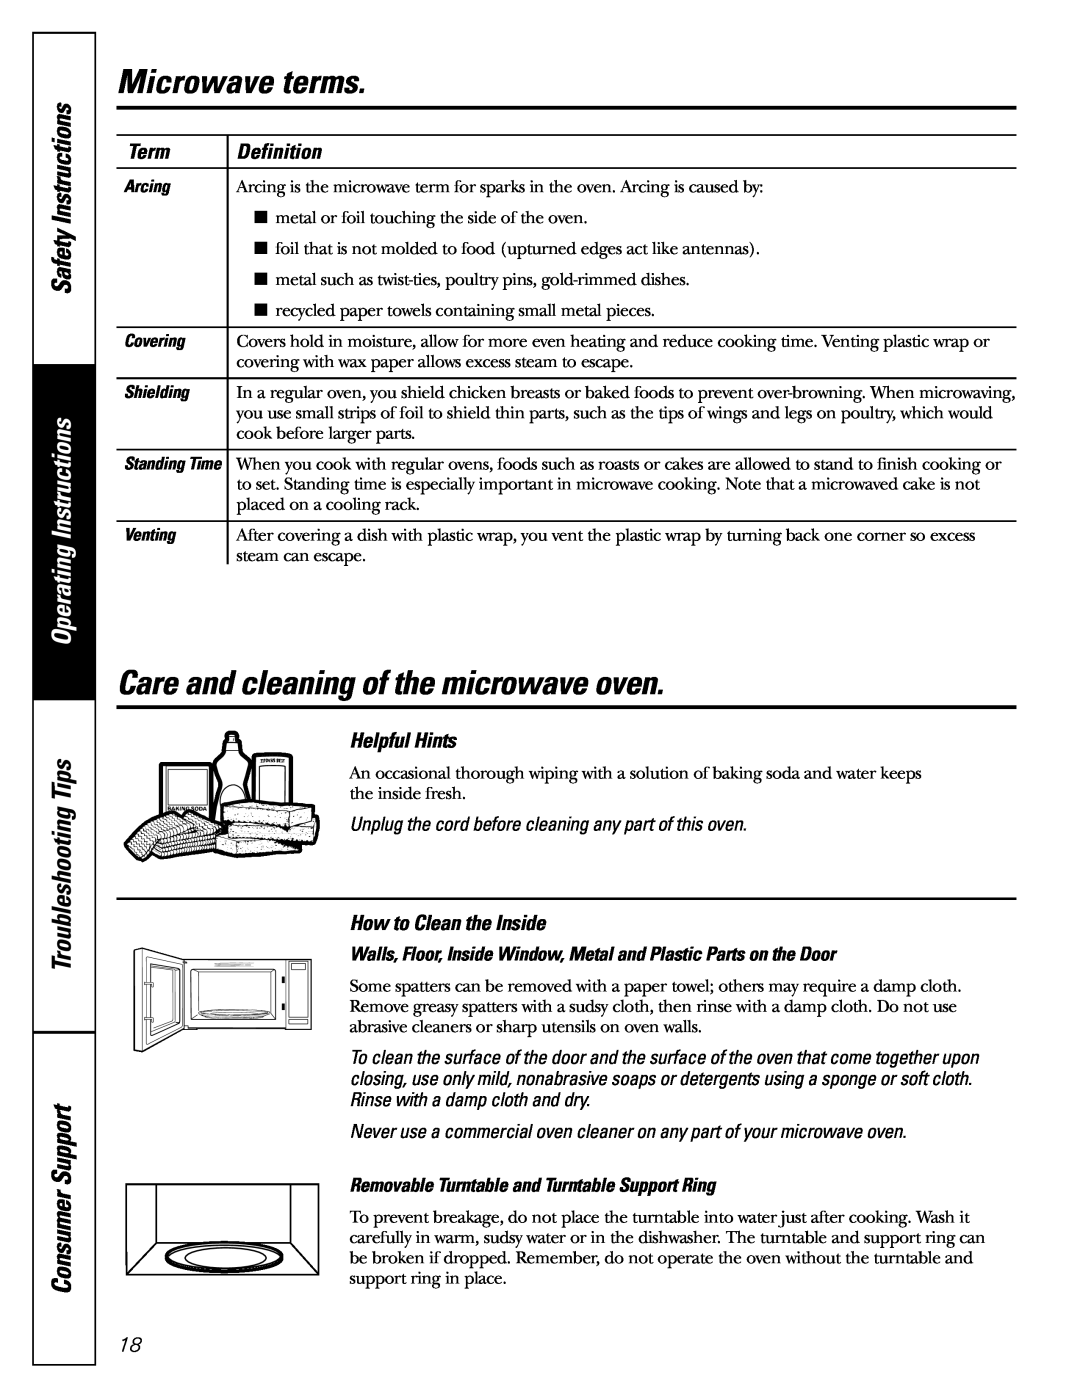 GE JES2251 Microwave terms, Care and cleaning of the microwave oven, Safety Instructions, Operating Instructions 